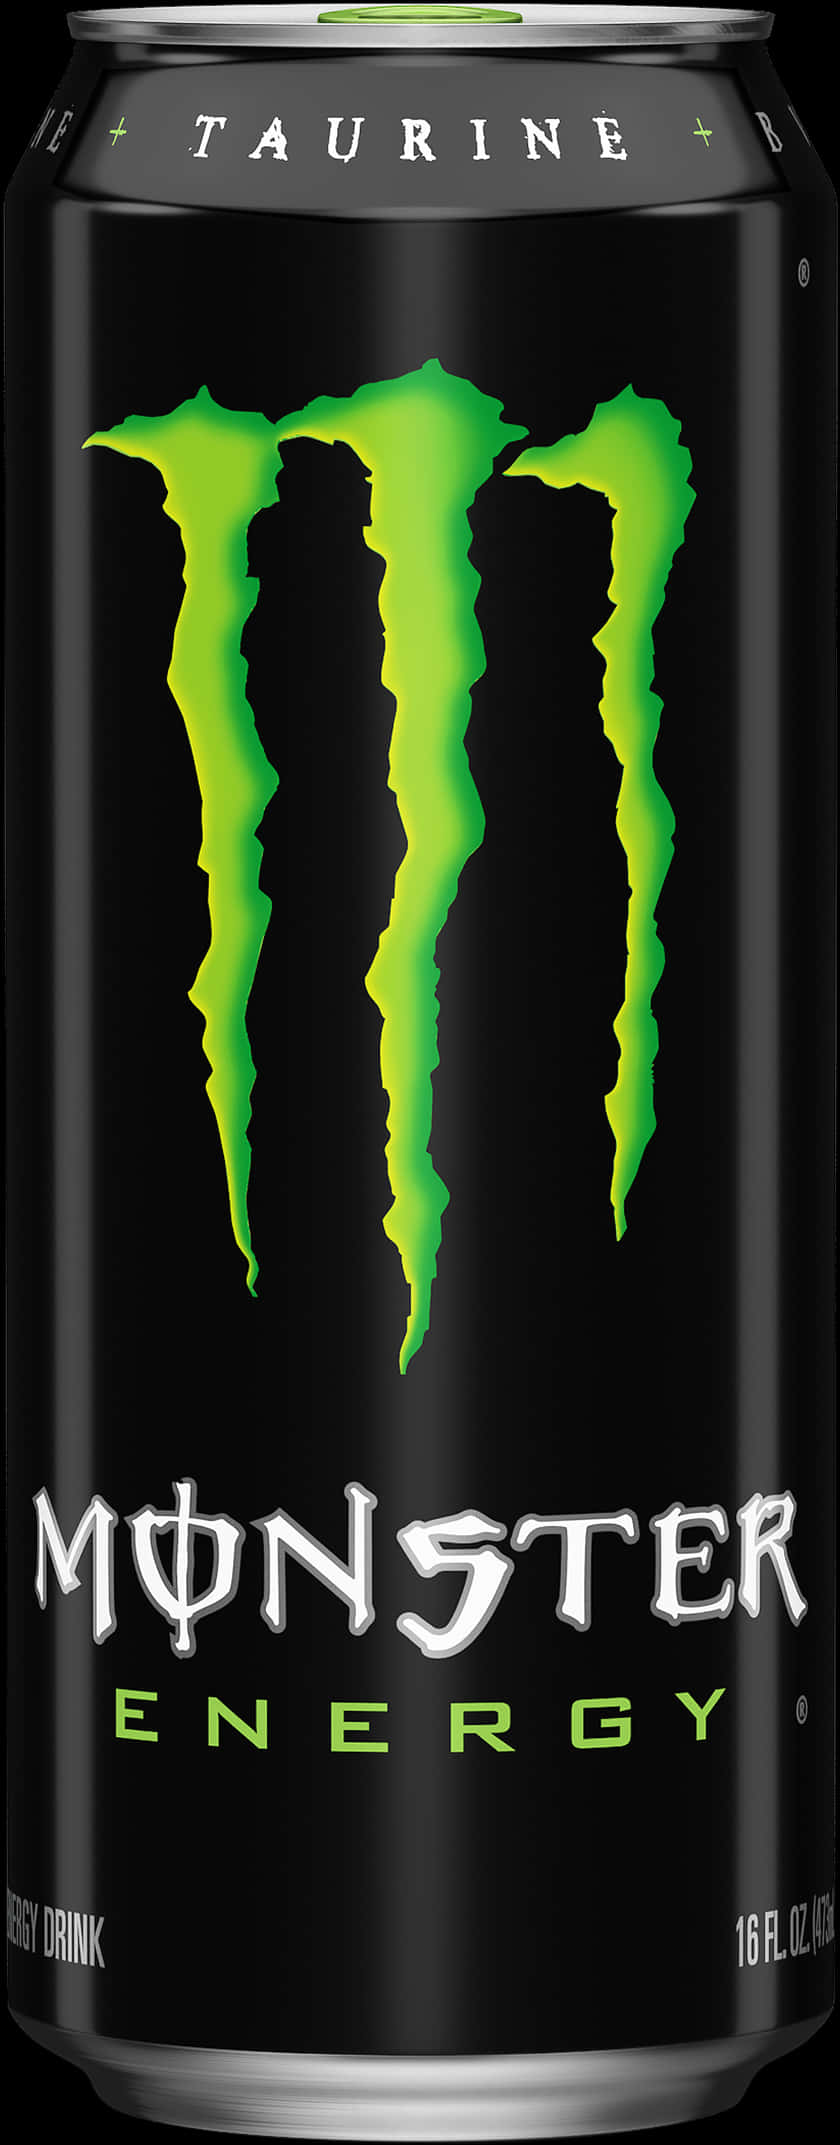 A Black Can With Green Streaks Of Liquid